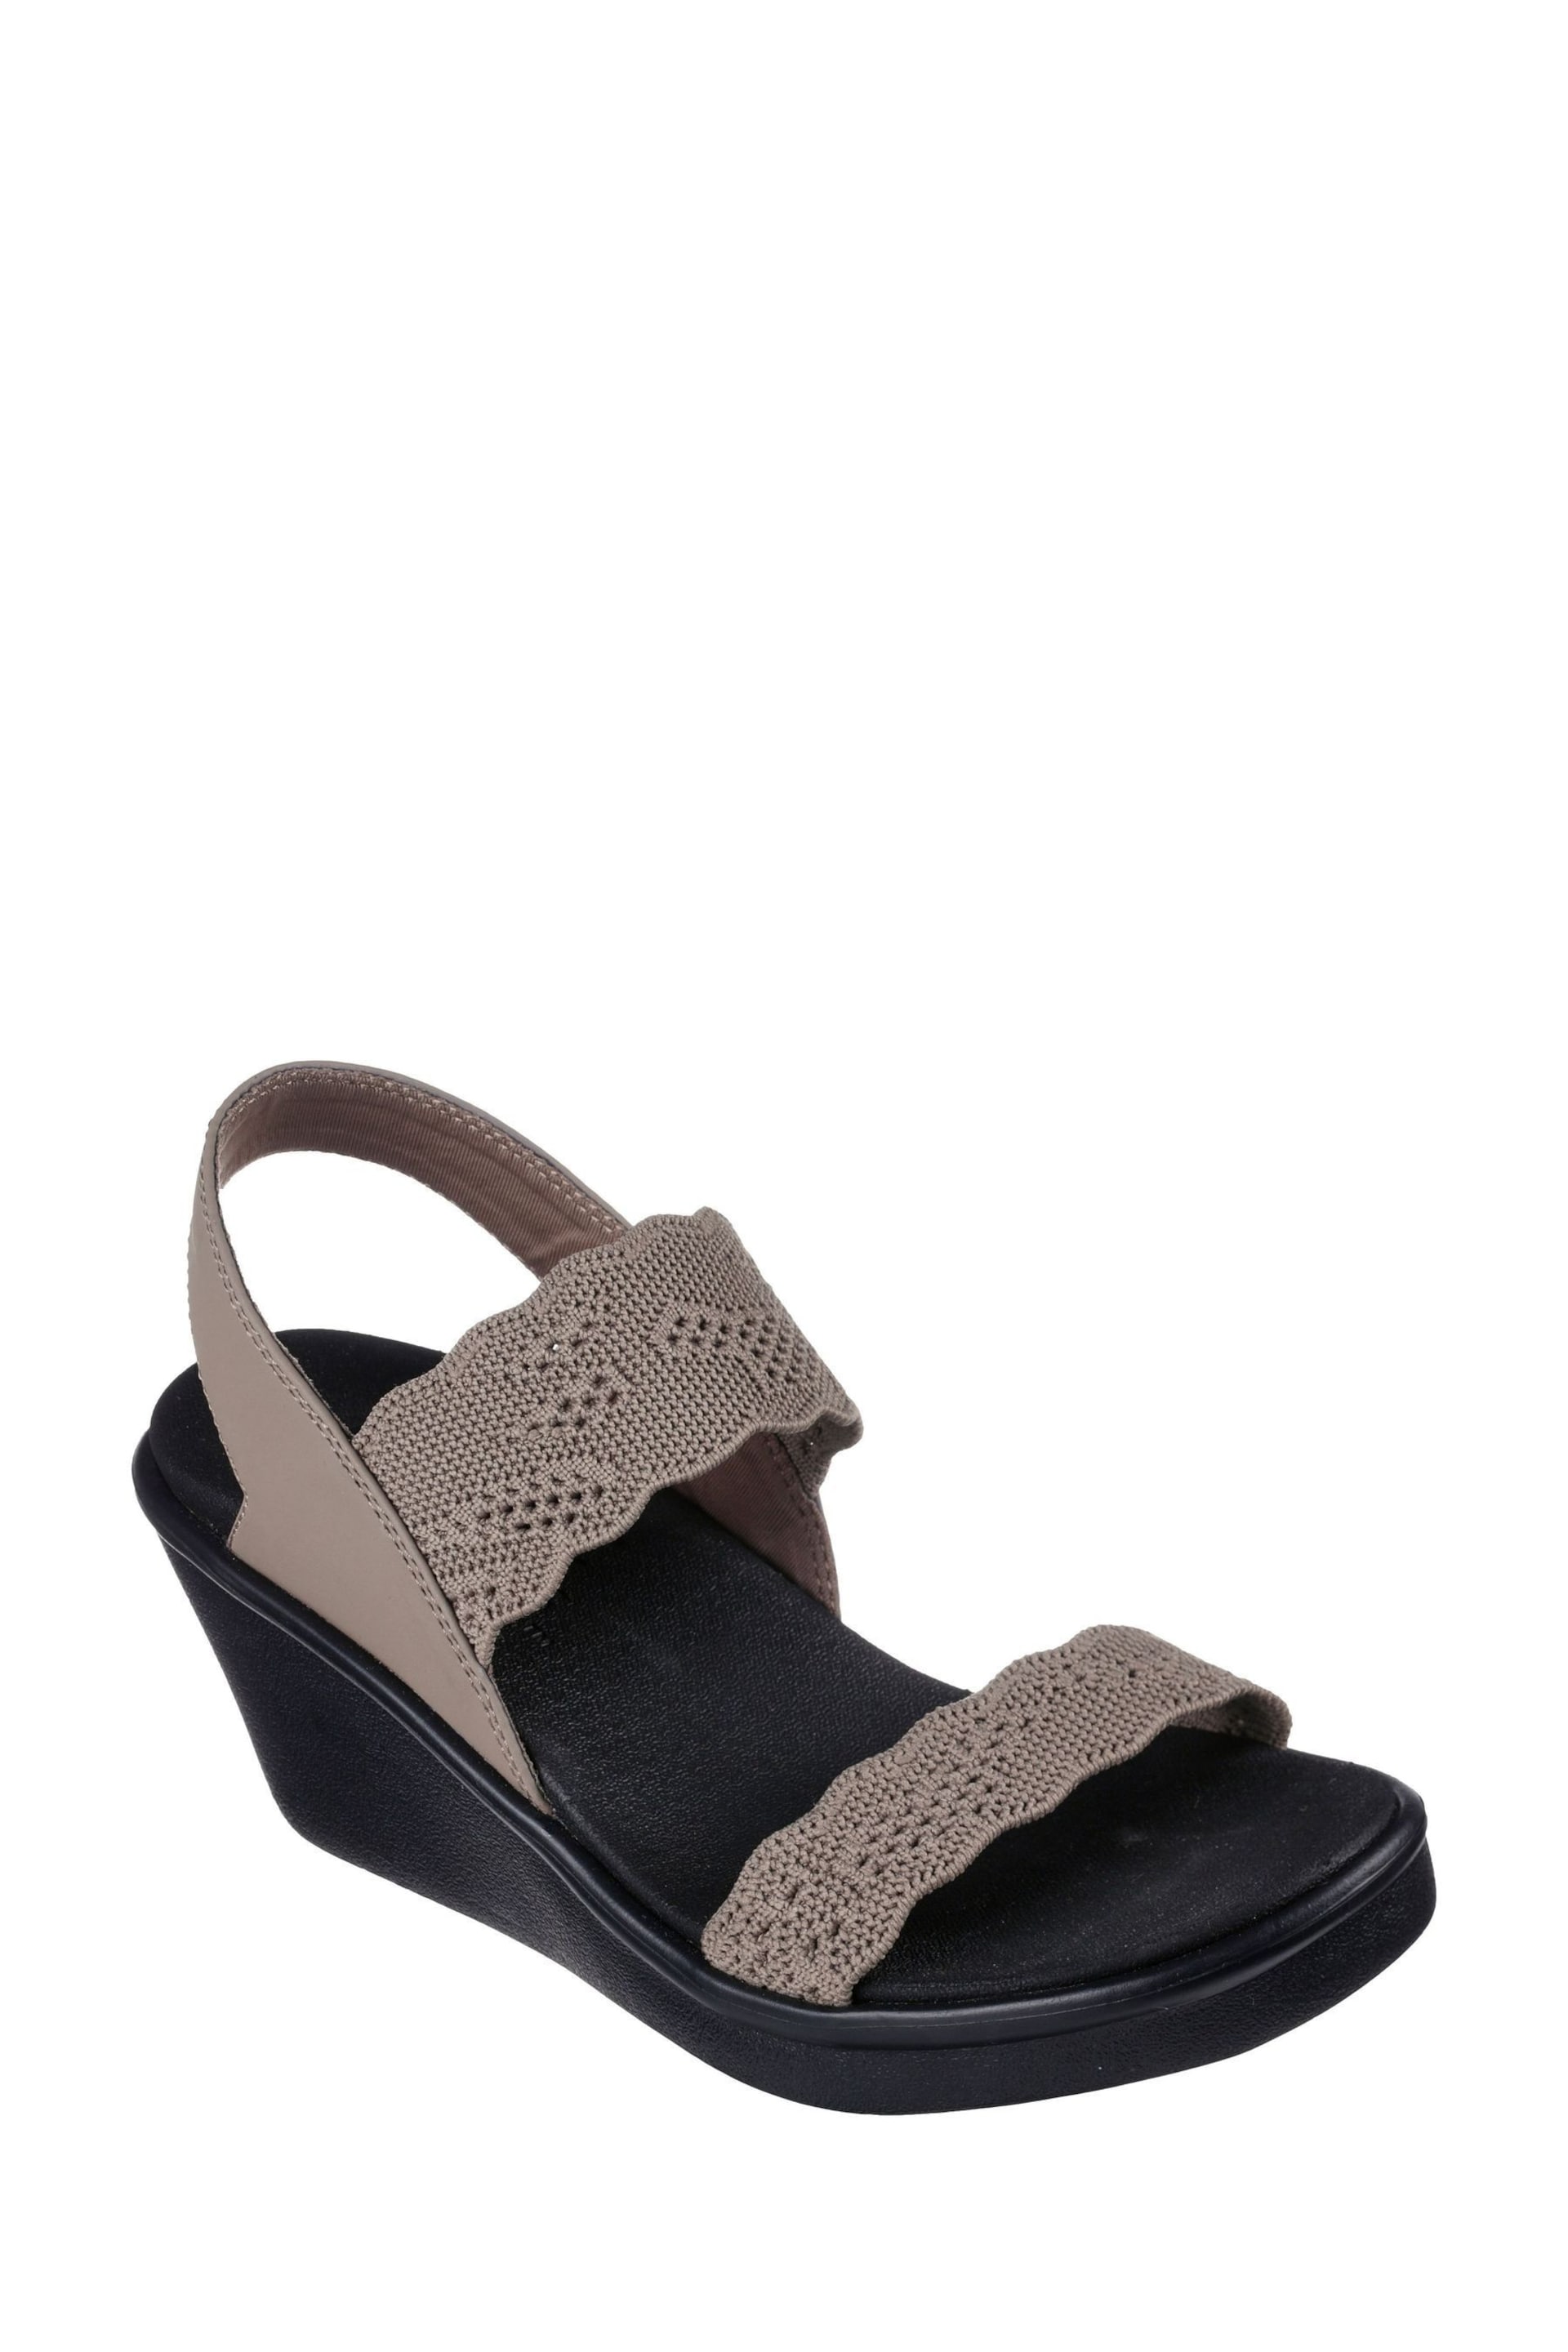 Skechers Brown Rumble On New Crush Womens Sandals - Image 2 of 6